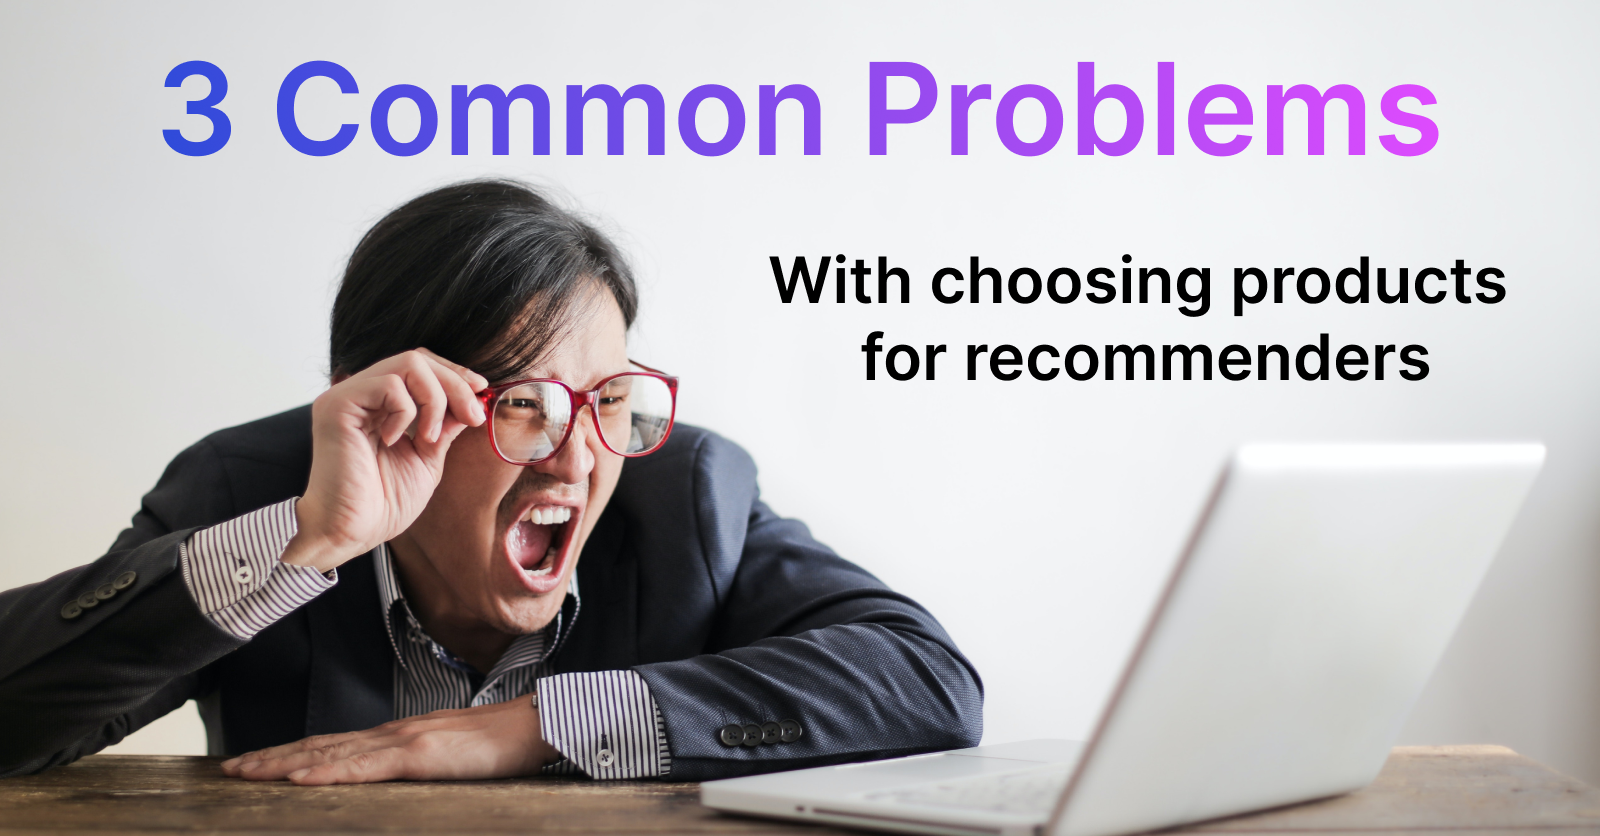 3 common problems with choosing products for recommenders